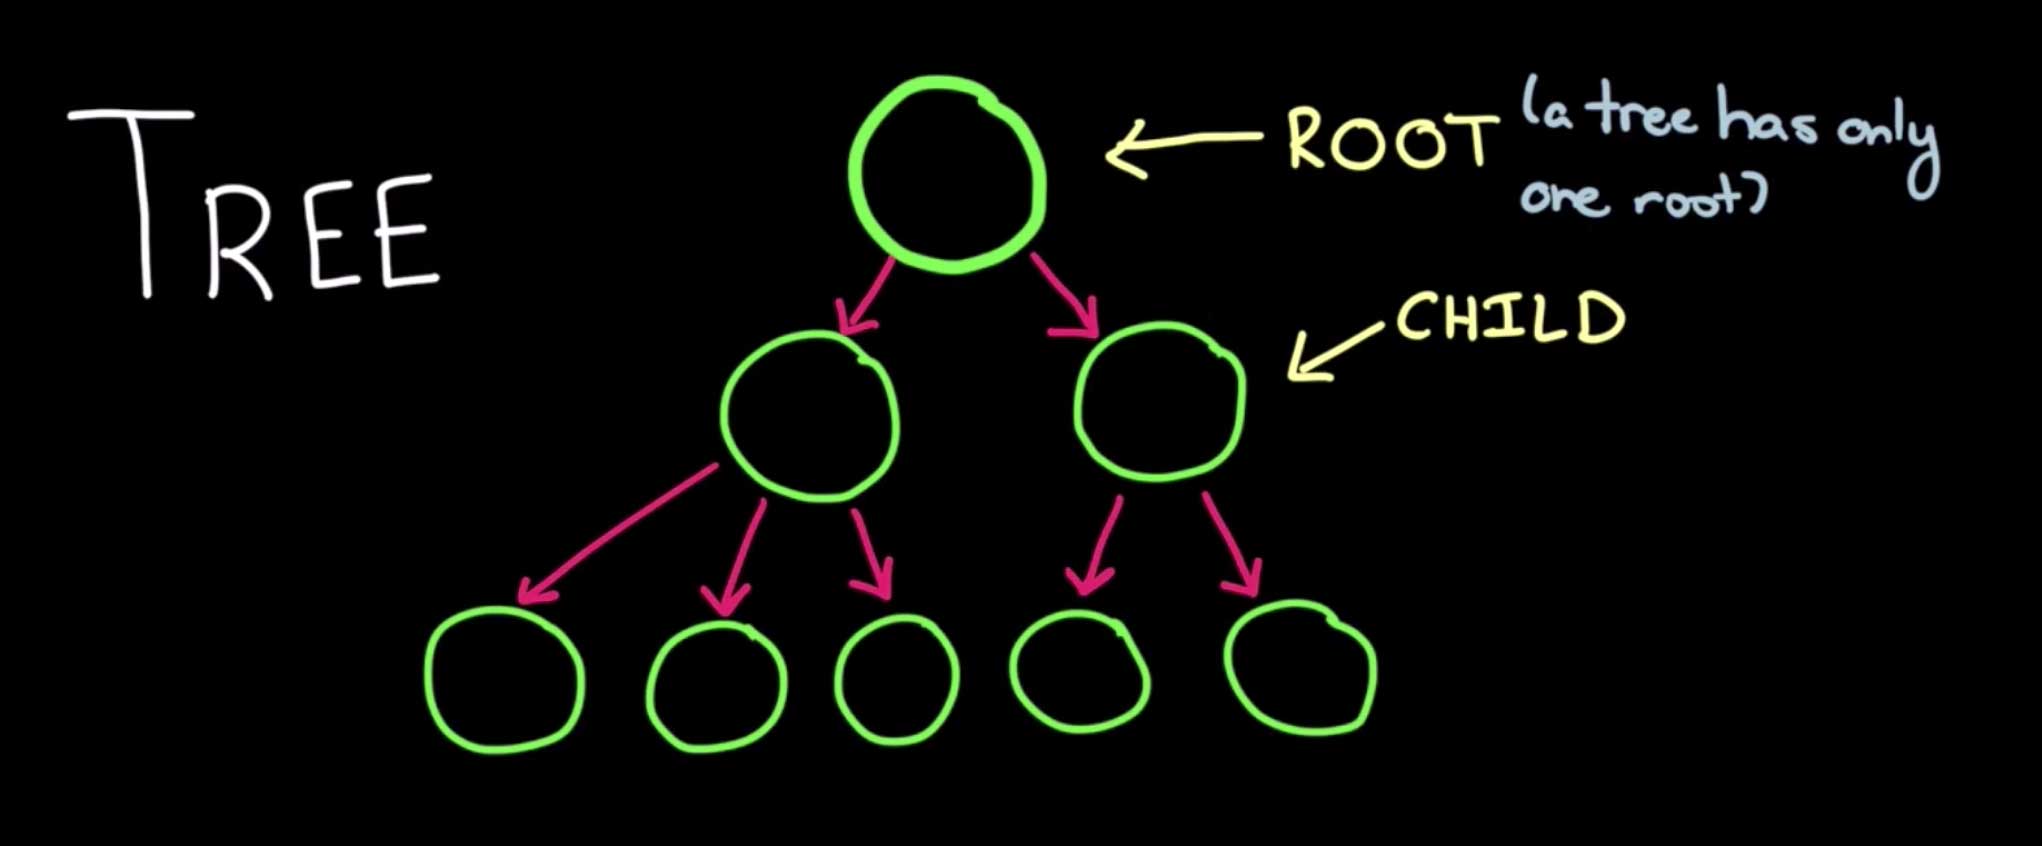 Drawing of a tree data structure